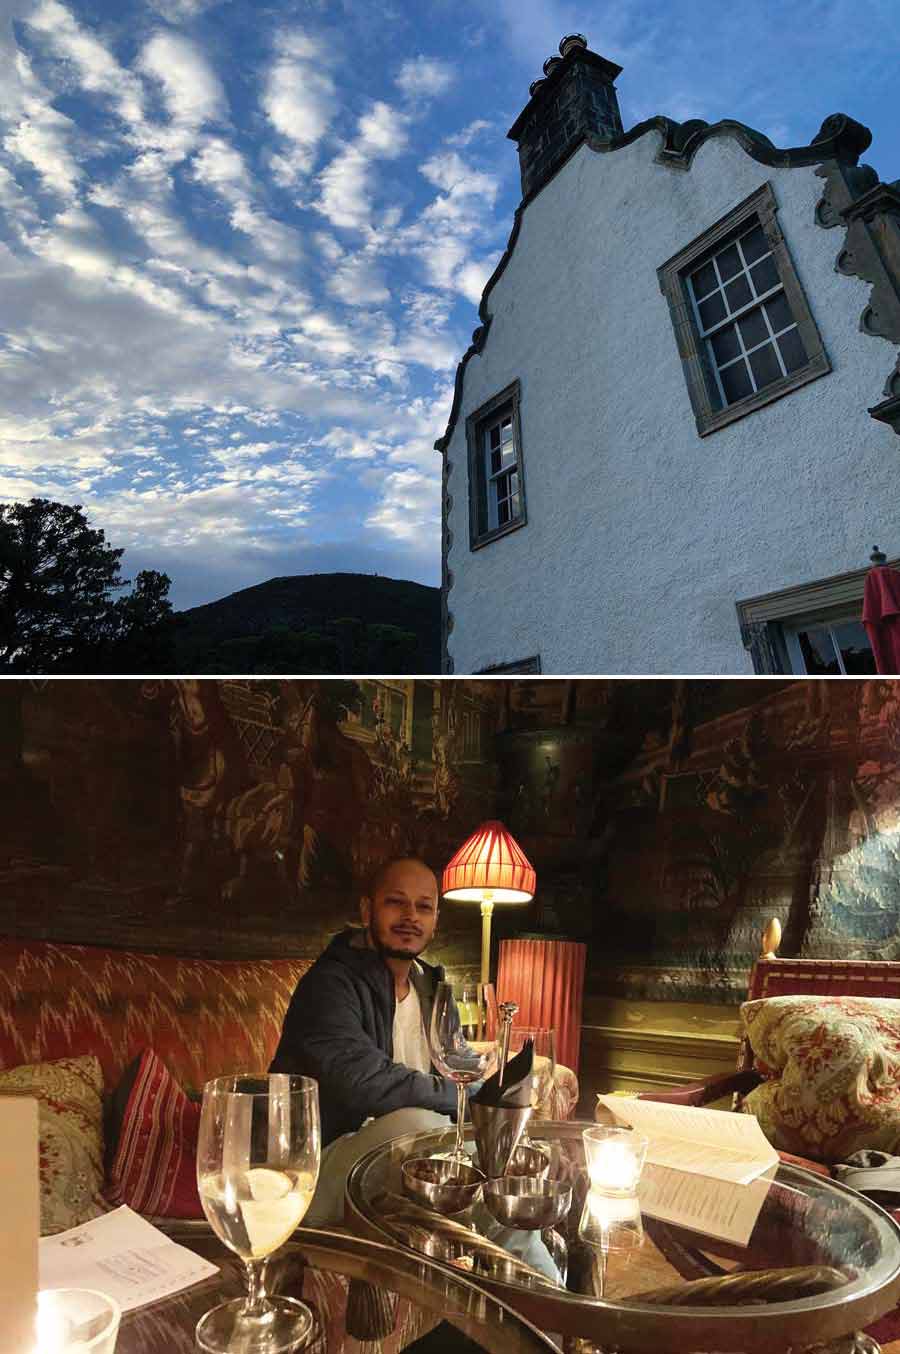 Prestonfield House is a beautiful hotel in Edinburgh with huge grounds and an attached golf course. A friend and I went one evening to soak in the opulence (and get a little drunk)